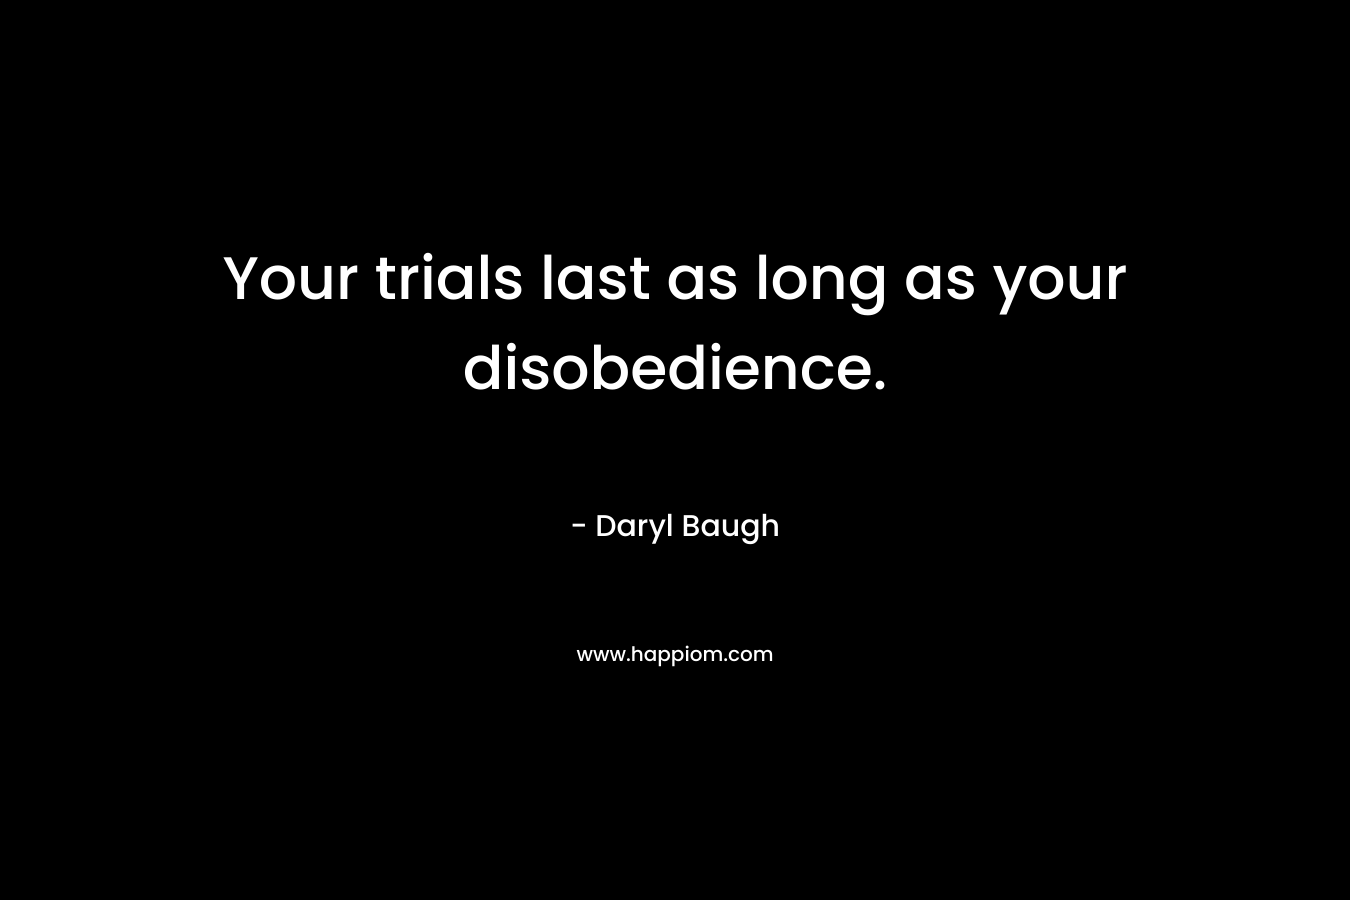 Your trials last as long as your disobedience.